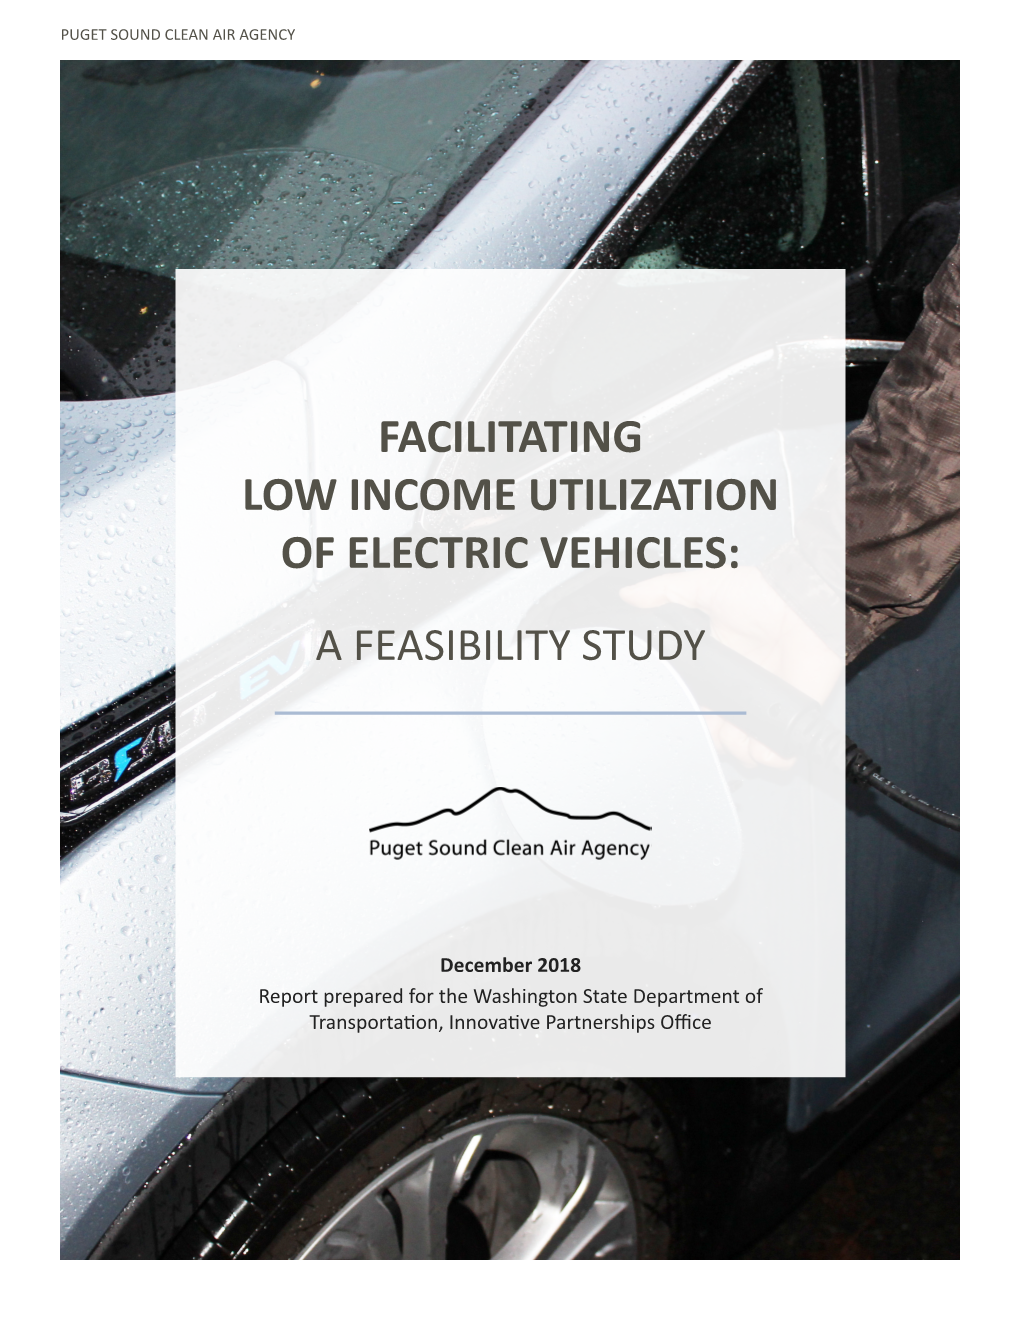 Facilitating Low Income Utilization of Electric Vehicles